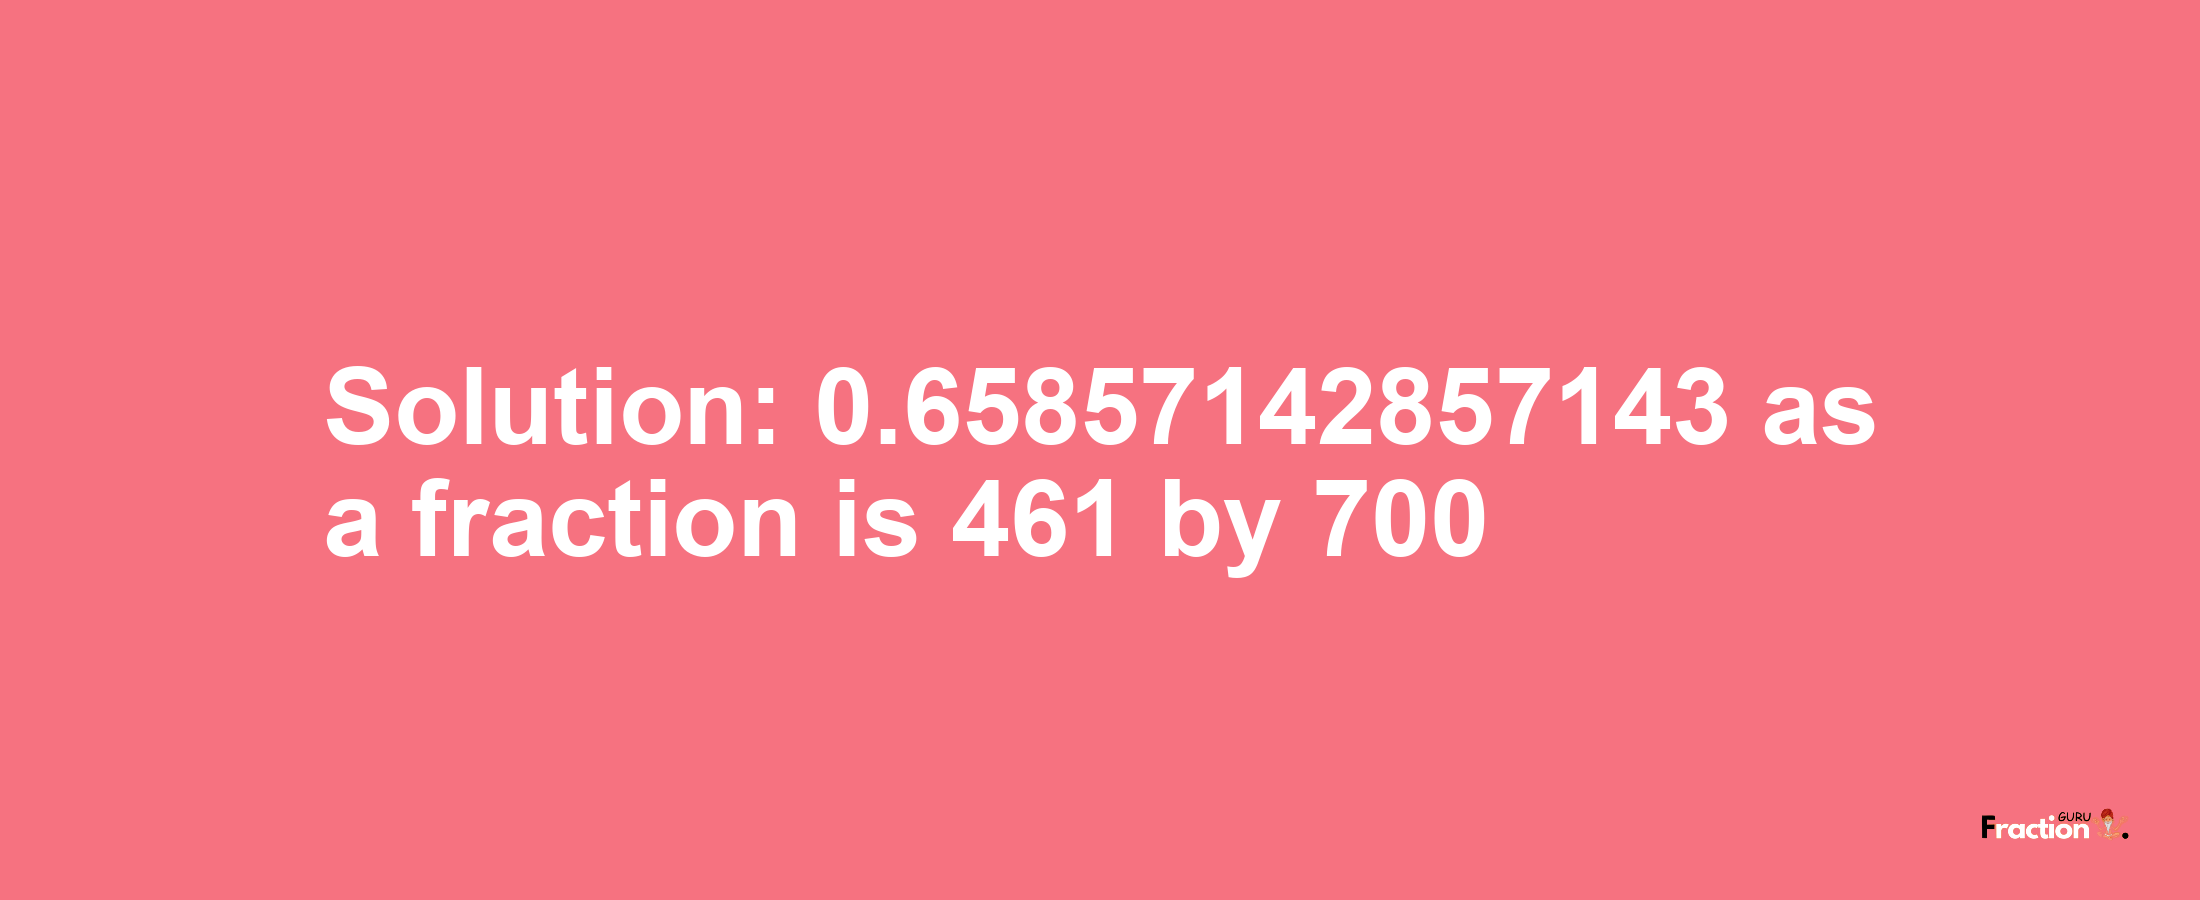 Solution:0.65857142857143 as a fraction is 461/700